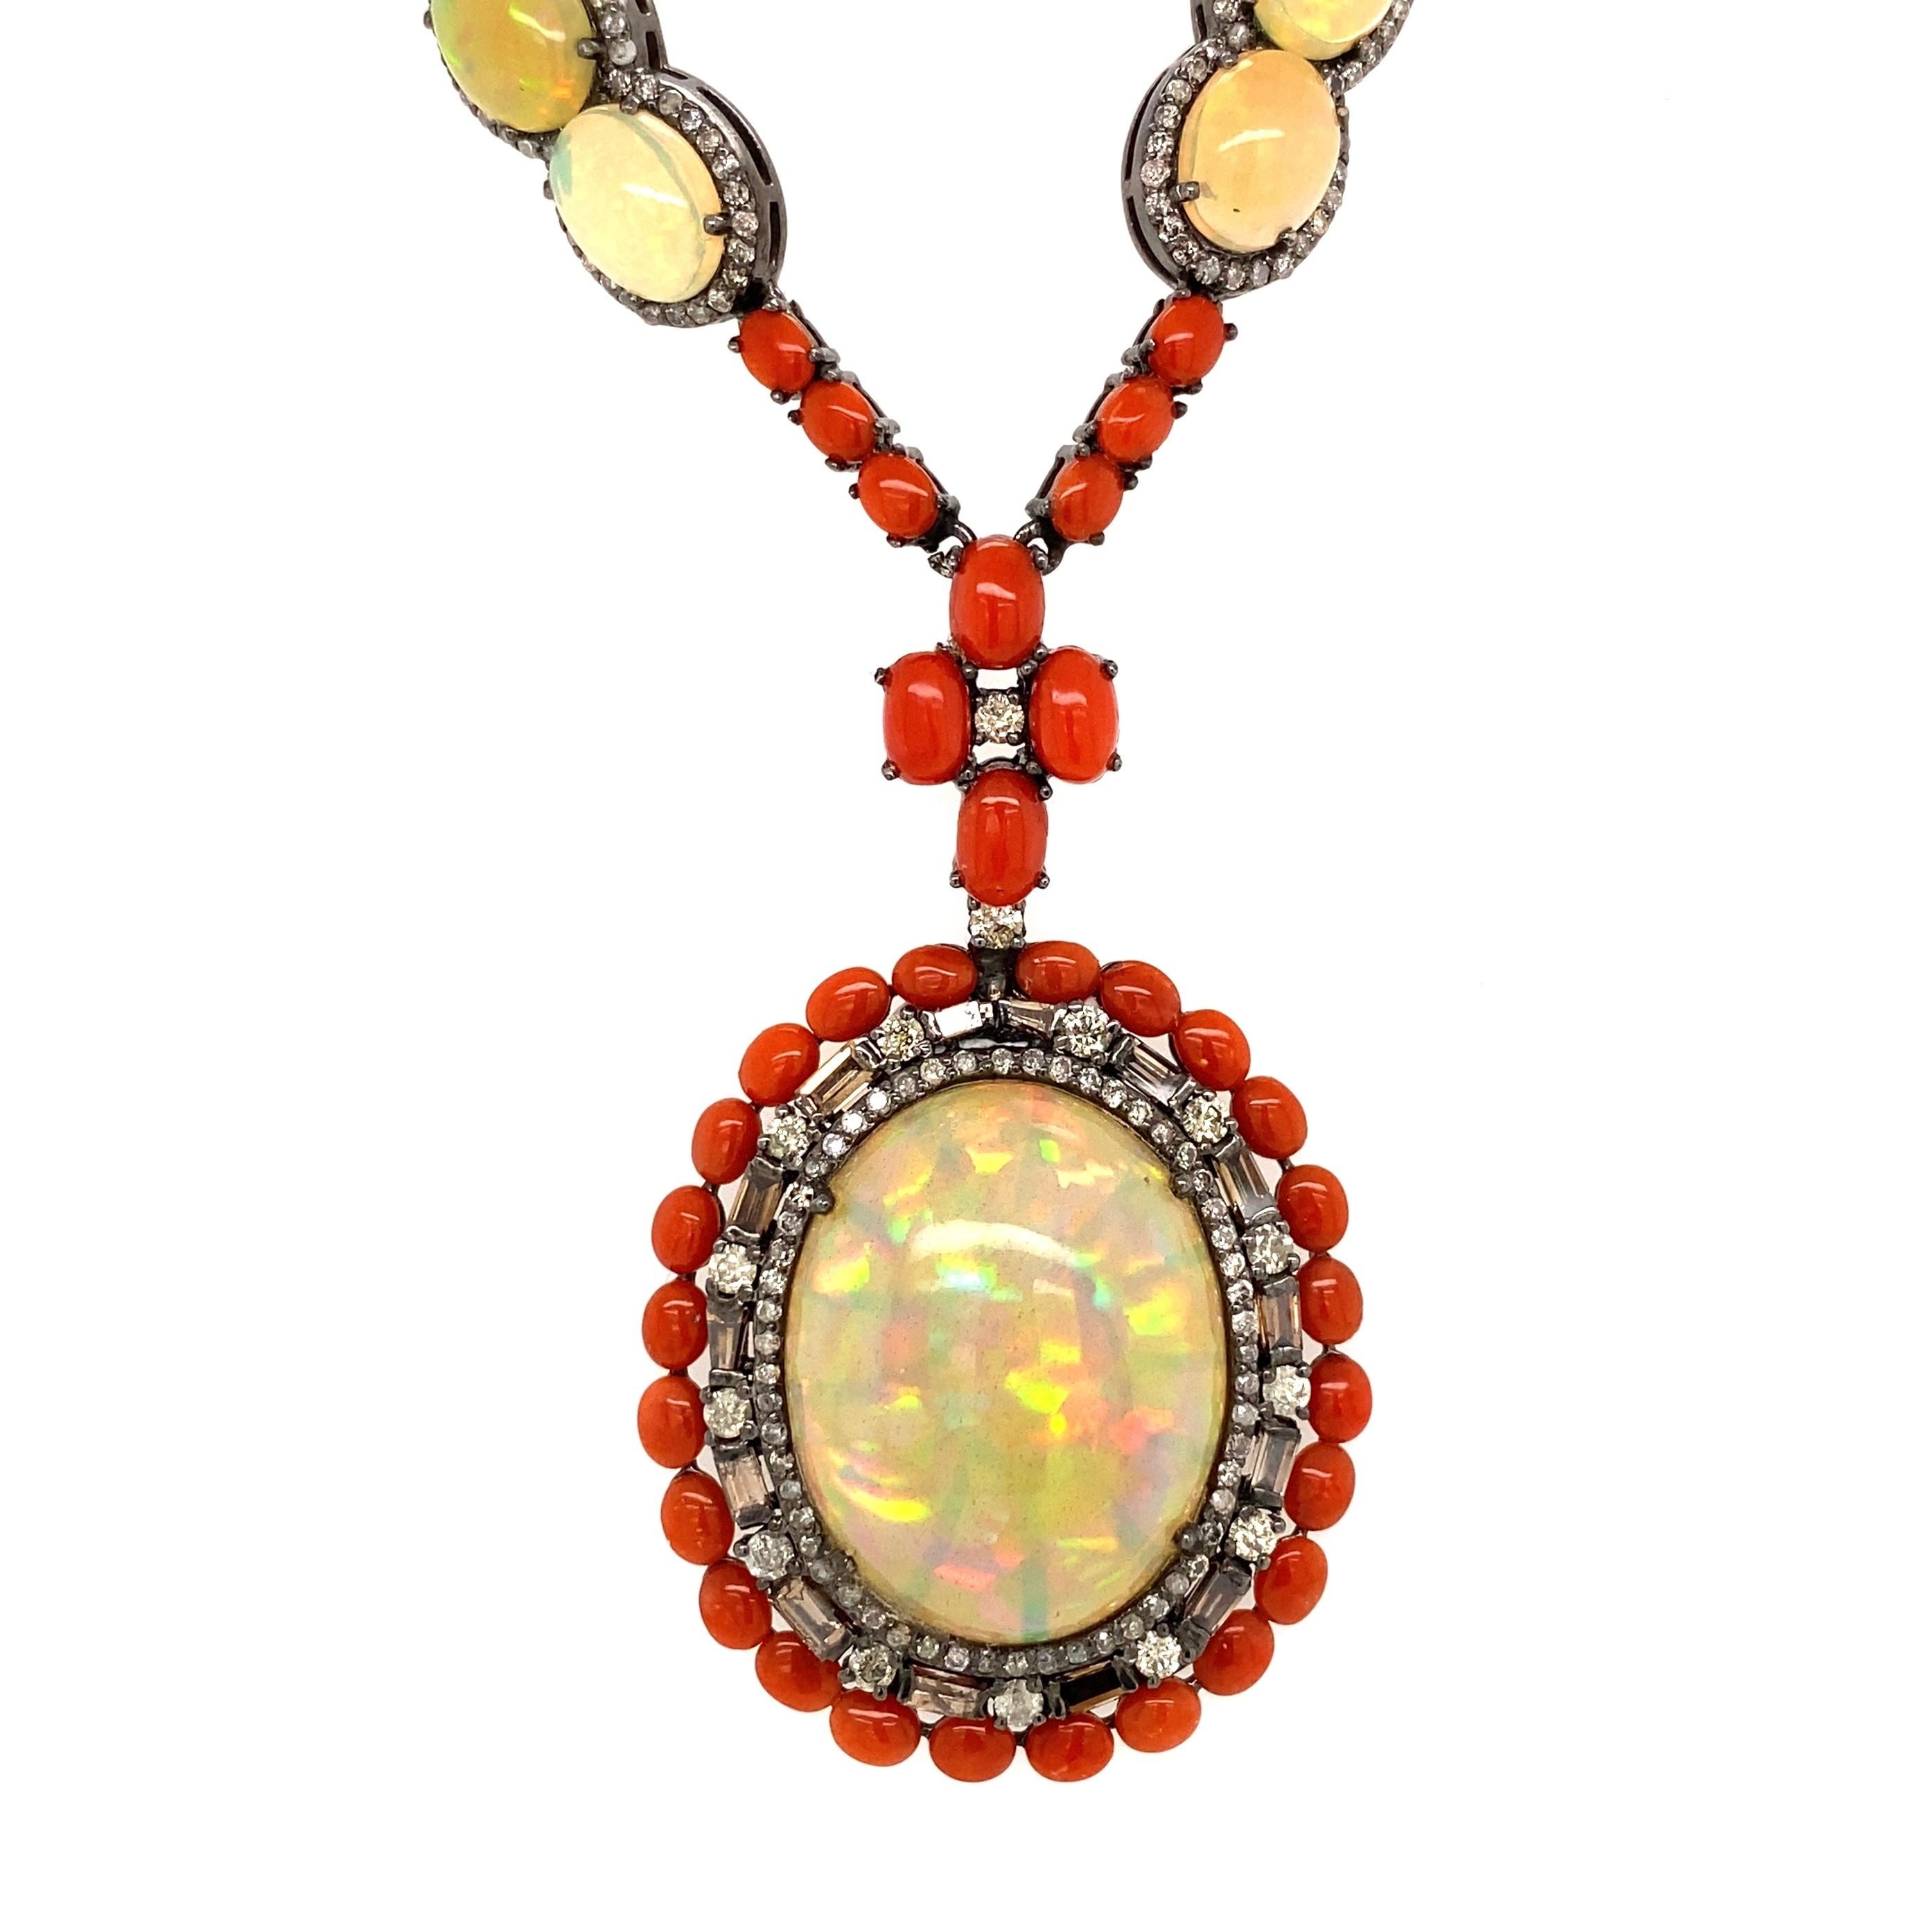 Beautiful finely detailed Necklace featuring 20 oval Opal Gemstones 44.13tcw, surrounded by Diamonds approx. 3.30tcw, interspaced with Coral, approx. 17tcw. Hand crafted Custom Made in 14 Karat Gold and Sterling Silver 925 mounting. Approx.